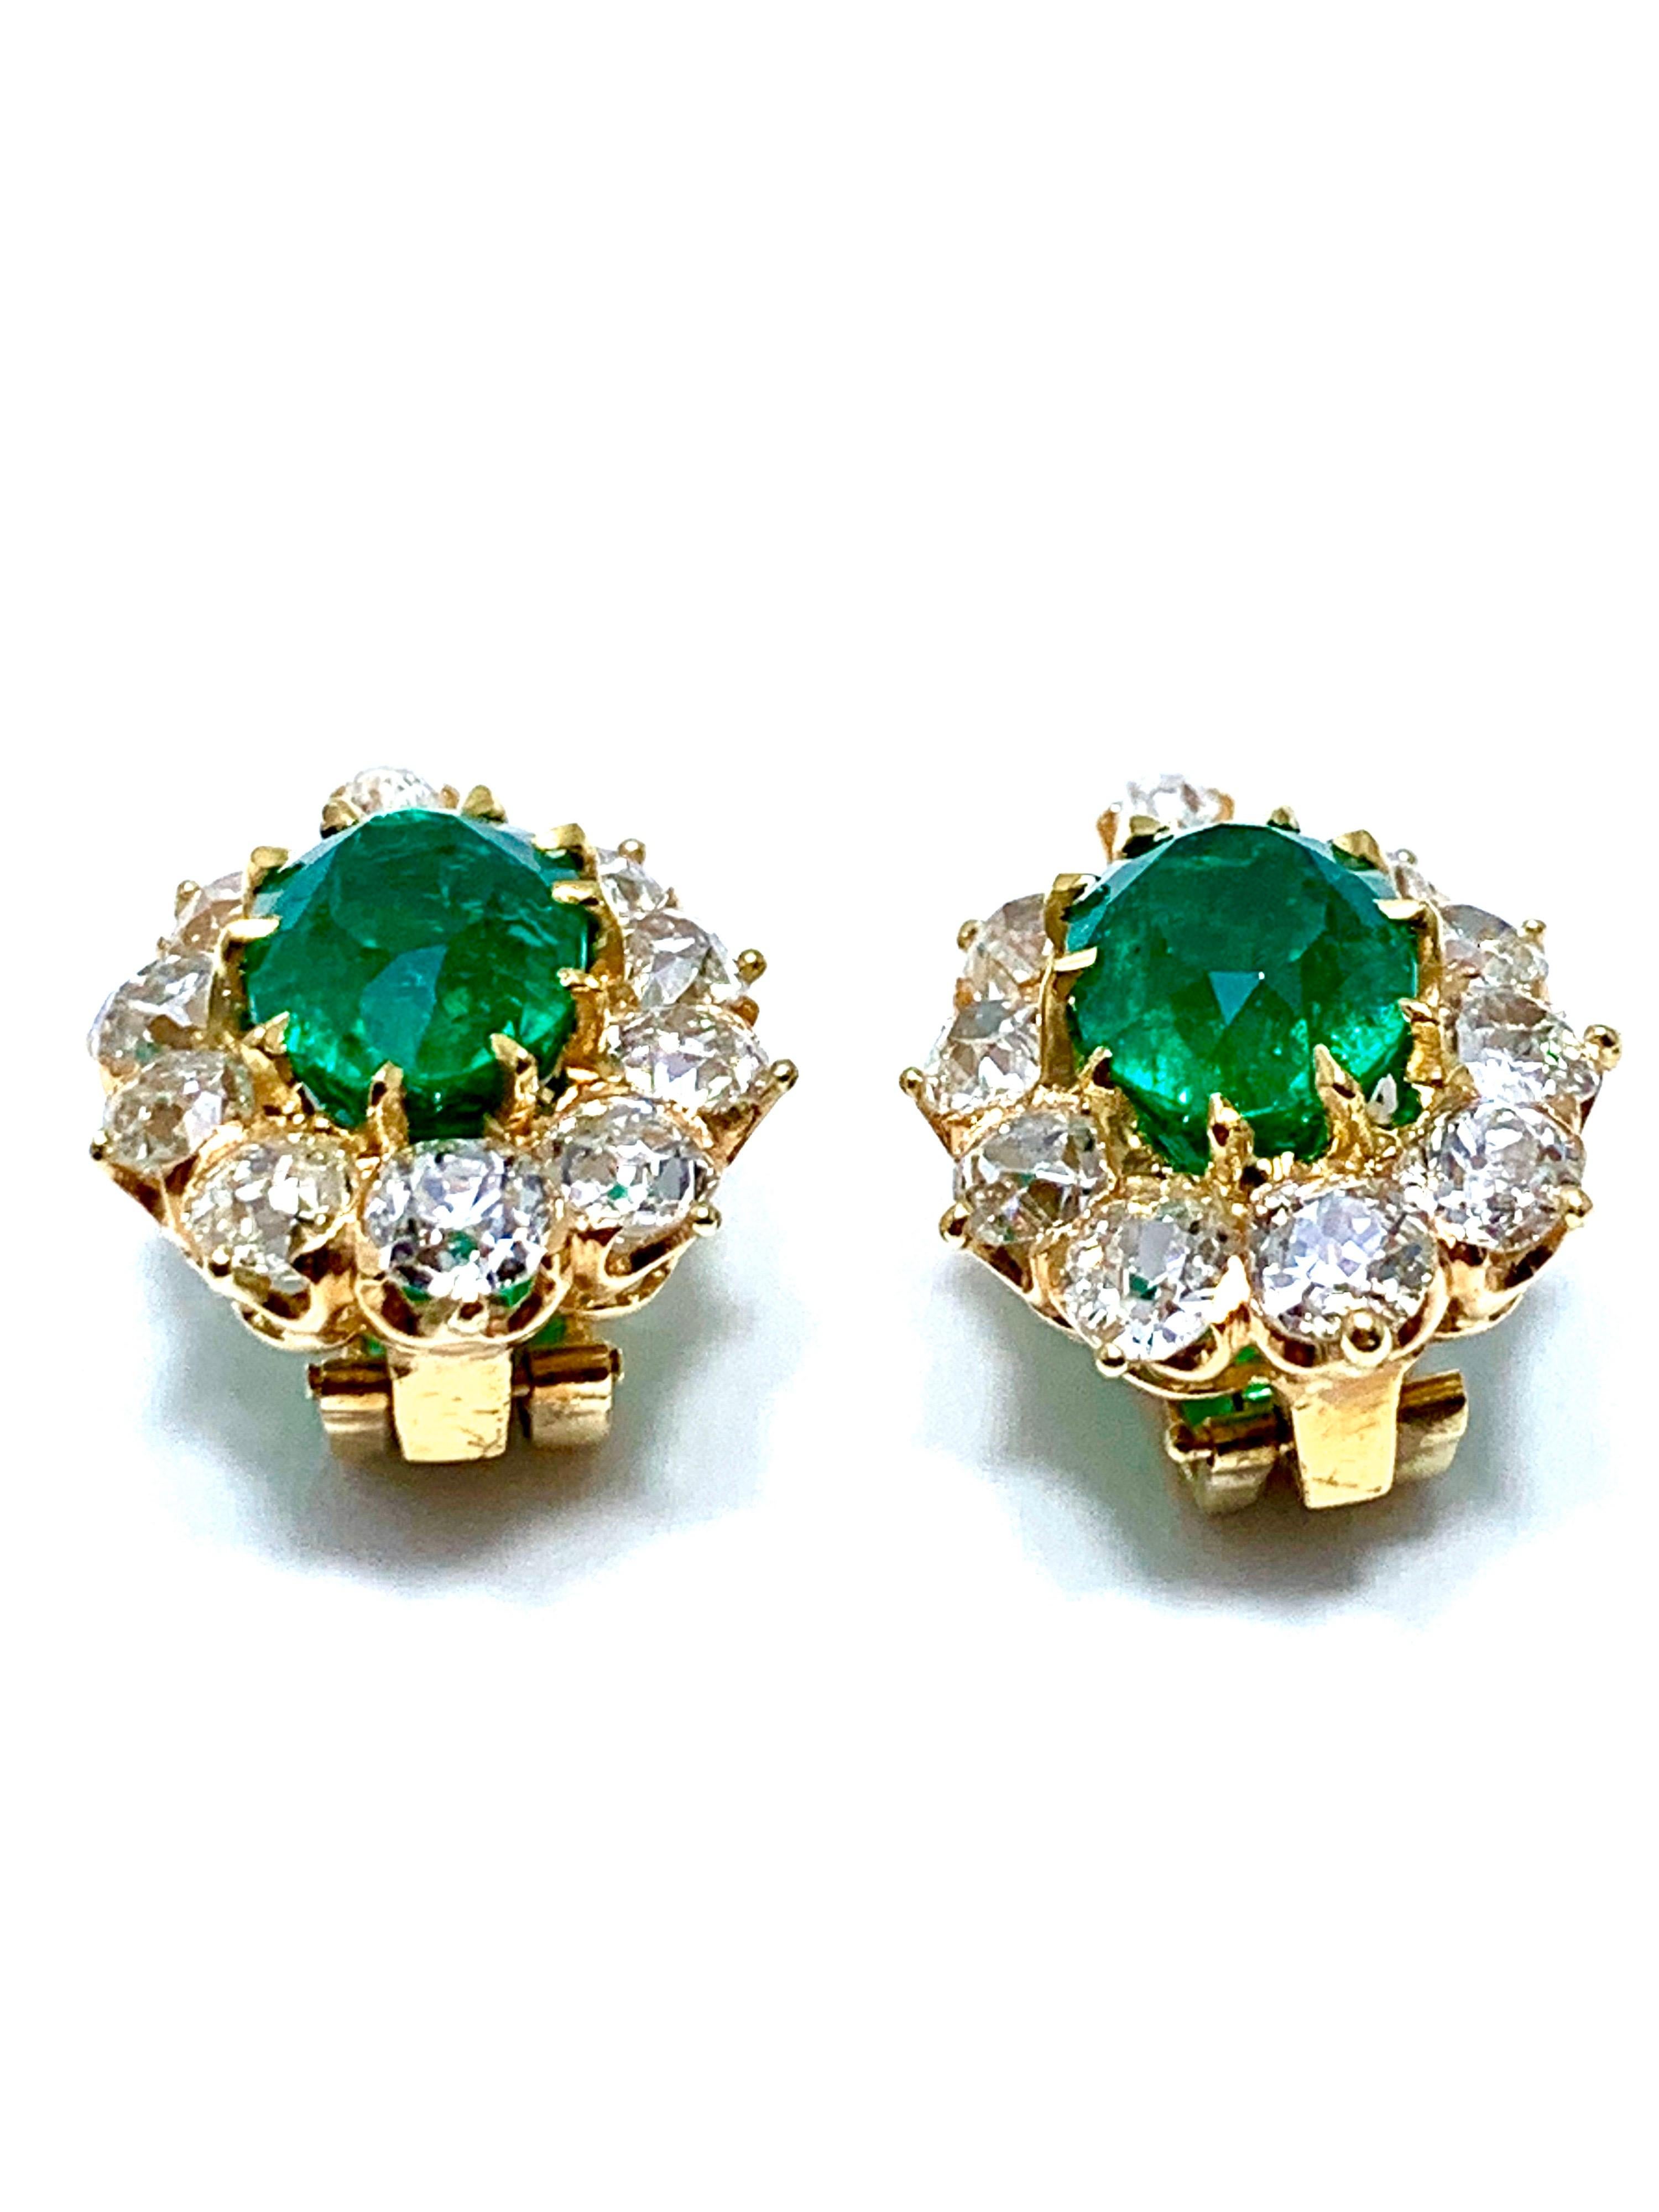 Women's or Men's 6.25 Carat Natural Colombian Oval Emerald and Old European Cut Diamonds Earrings For Sale